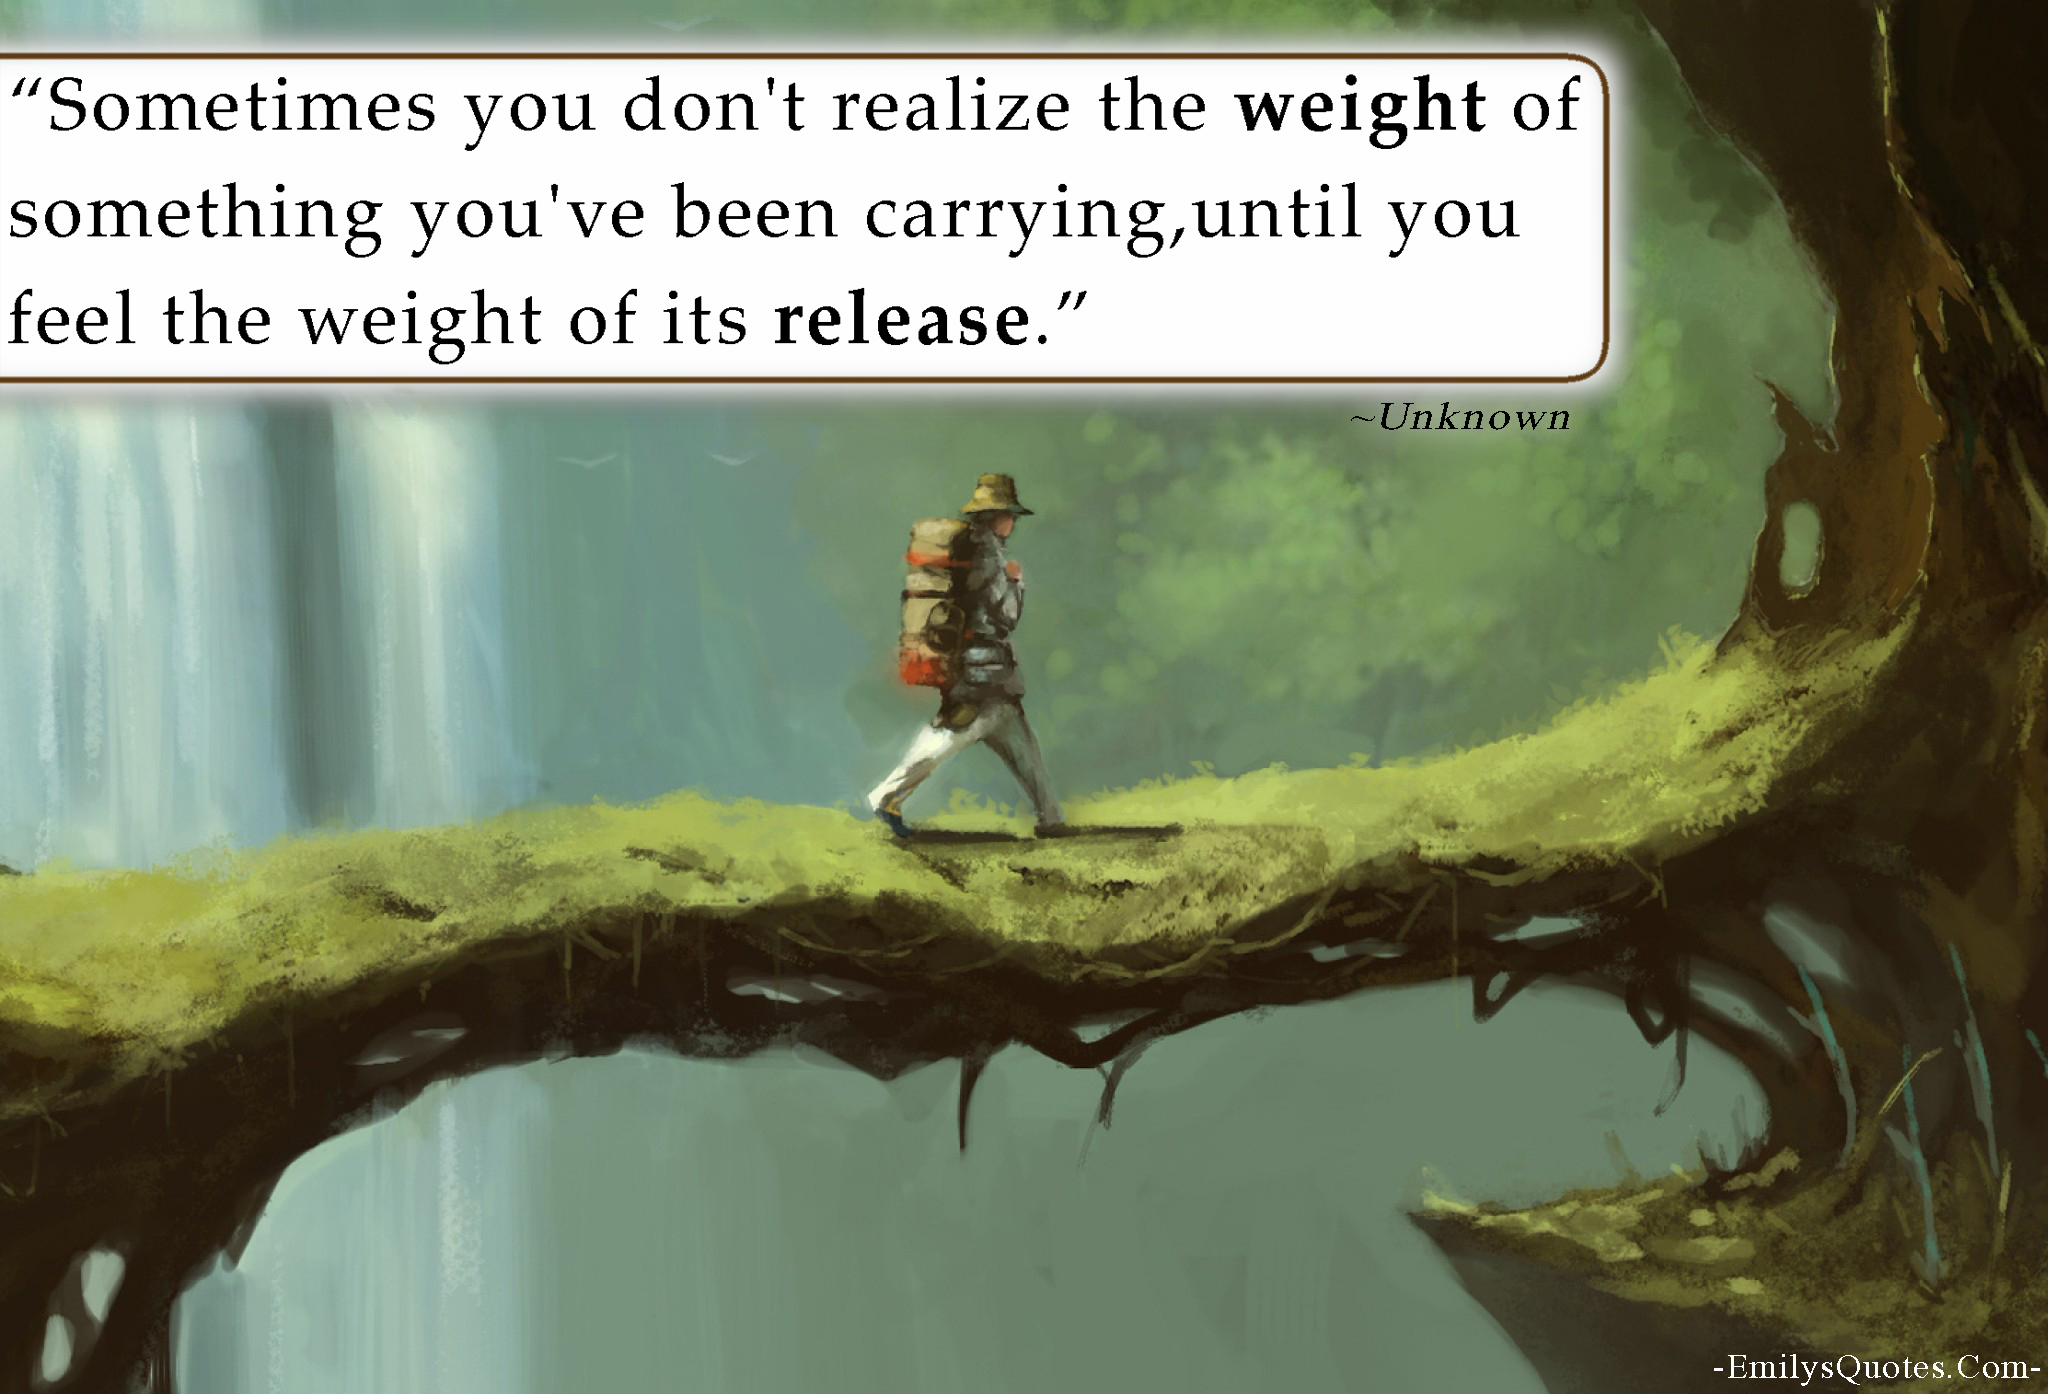 Sometimes you don’t realize the weight of something you’ve been carrying, until you feel the weight of its release